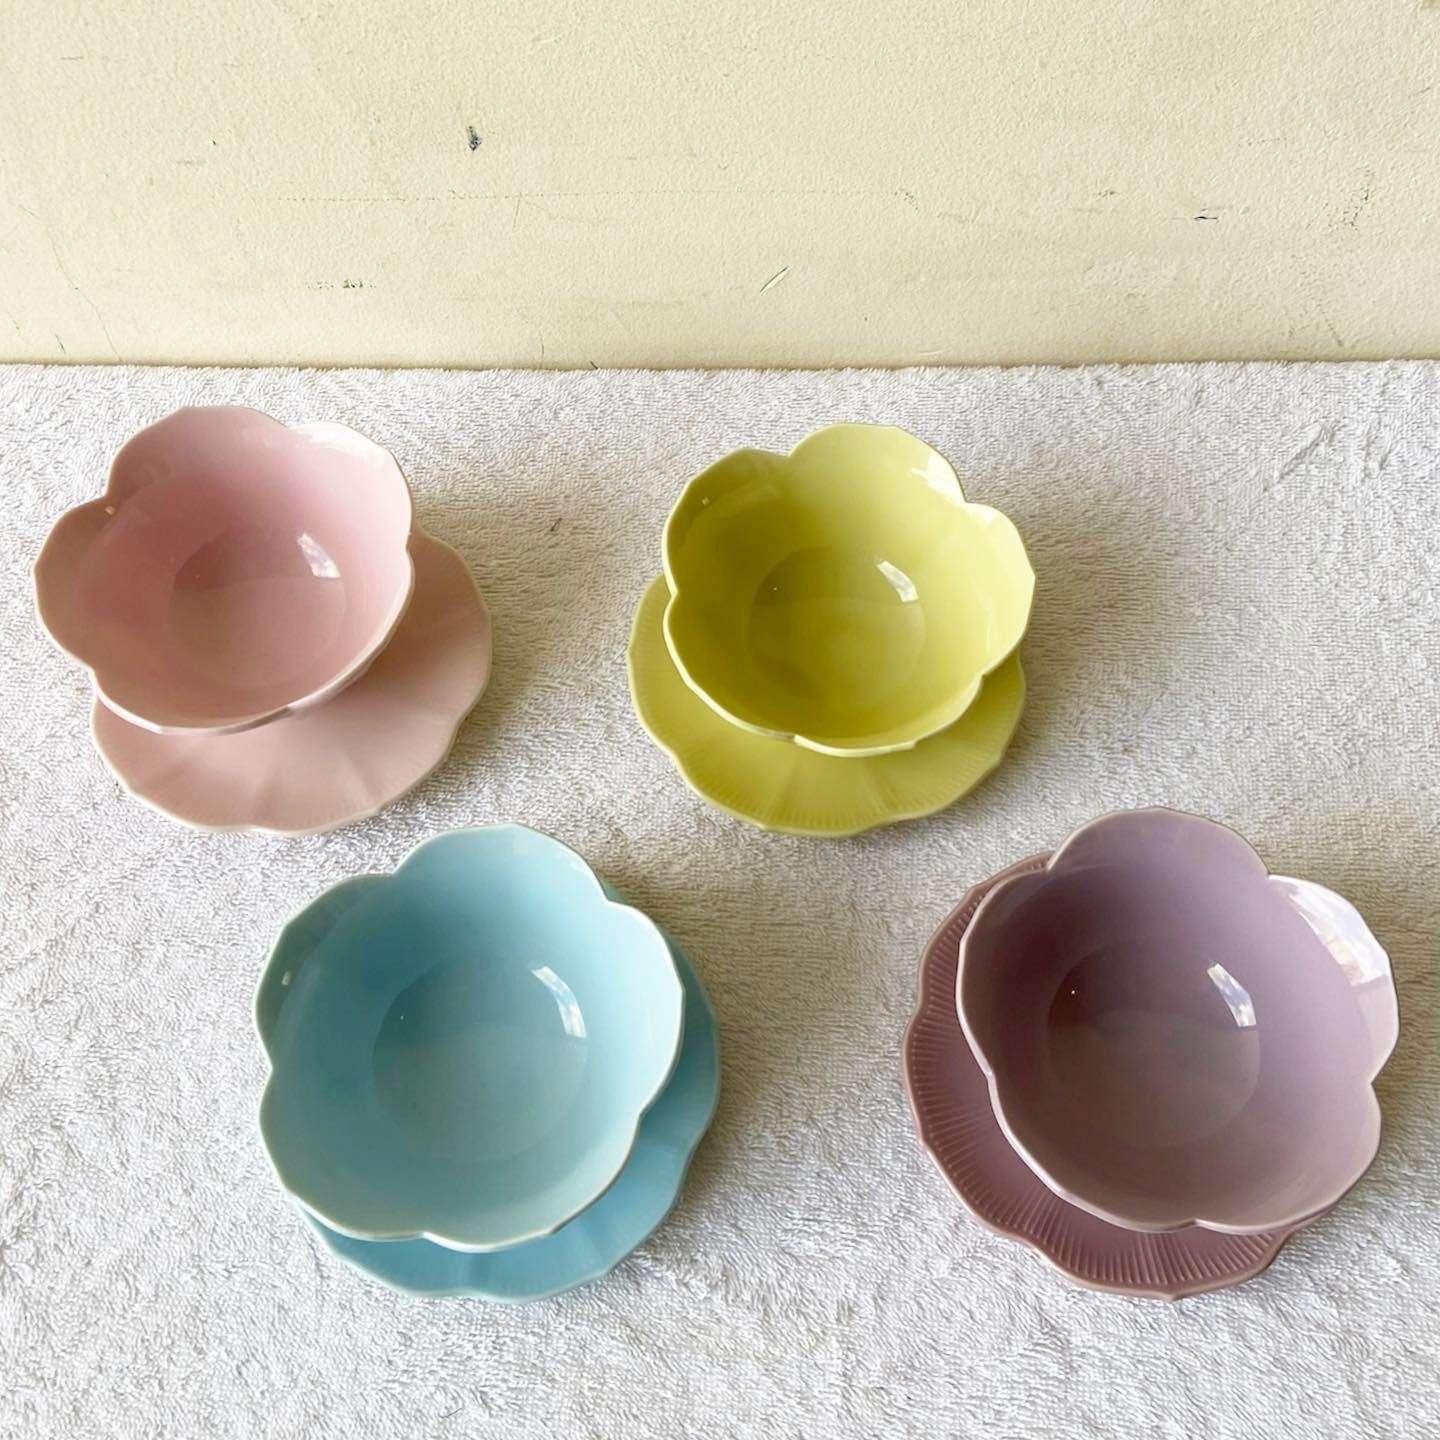 Exceptional set of 4 saucers and 4 bowls by Lillian Venon. Each bowl displays a plant shape, one in pink, purple, blue and yellow.

Bowls measure 4.5”D, 2.5”H
Saucers measure 5”D, 0.5”H